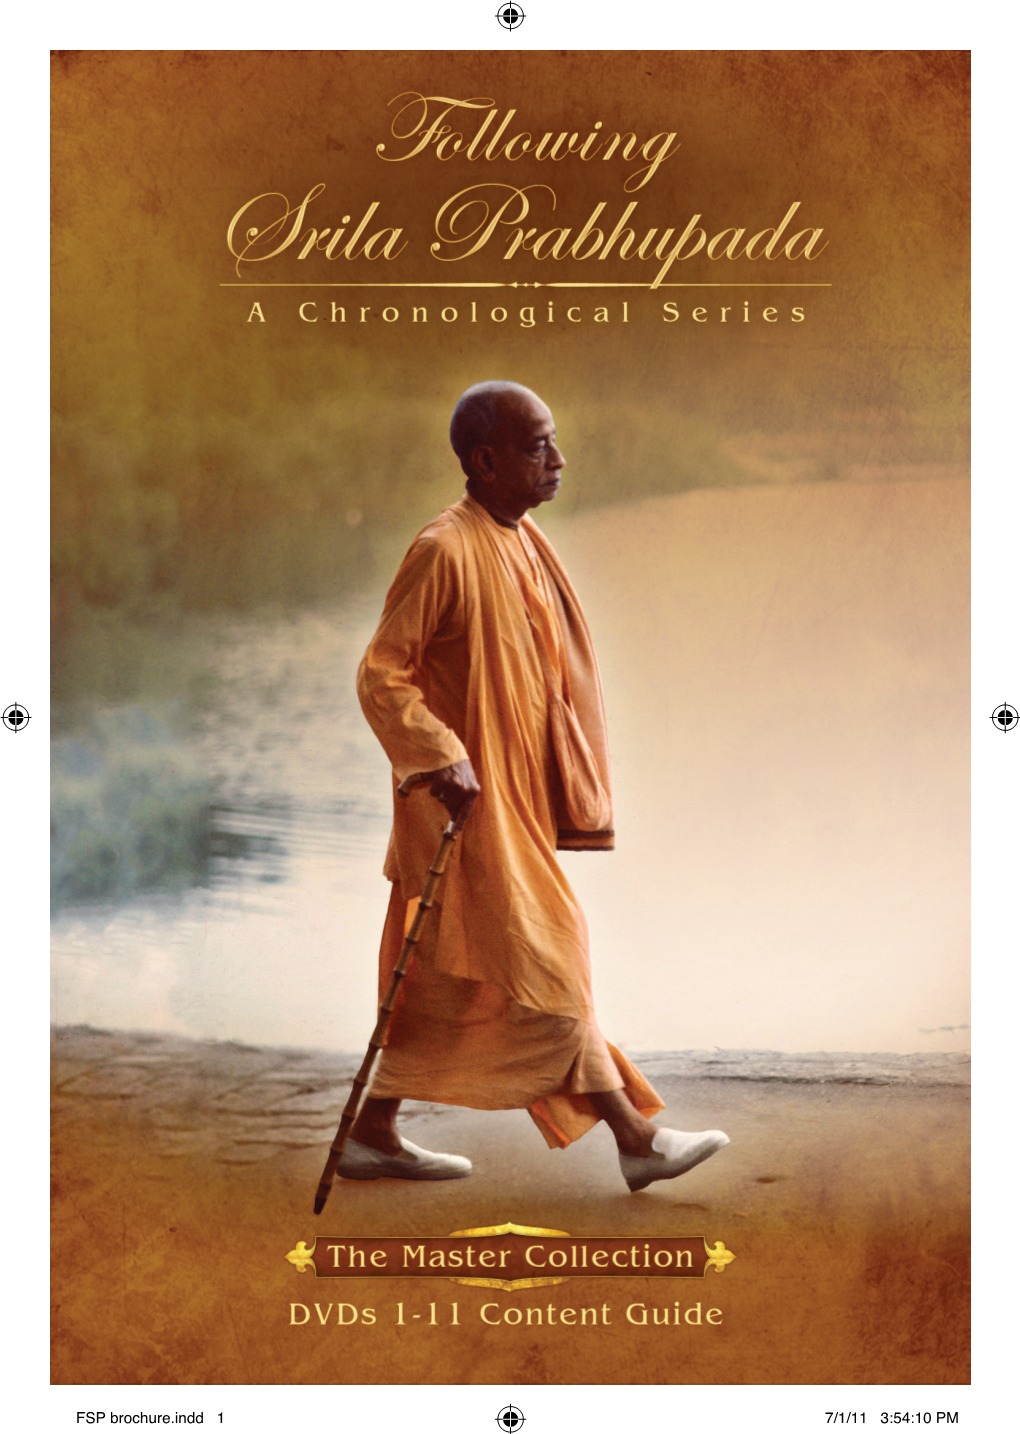 FSP Brochure.Indd 1 7/1/11 3:54:10 PM Dedicated to Our Ever Well-Wisher His Divine Grace A